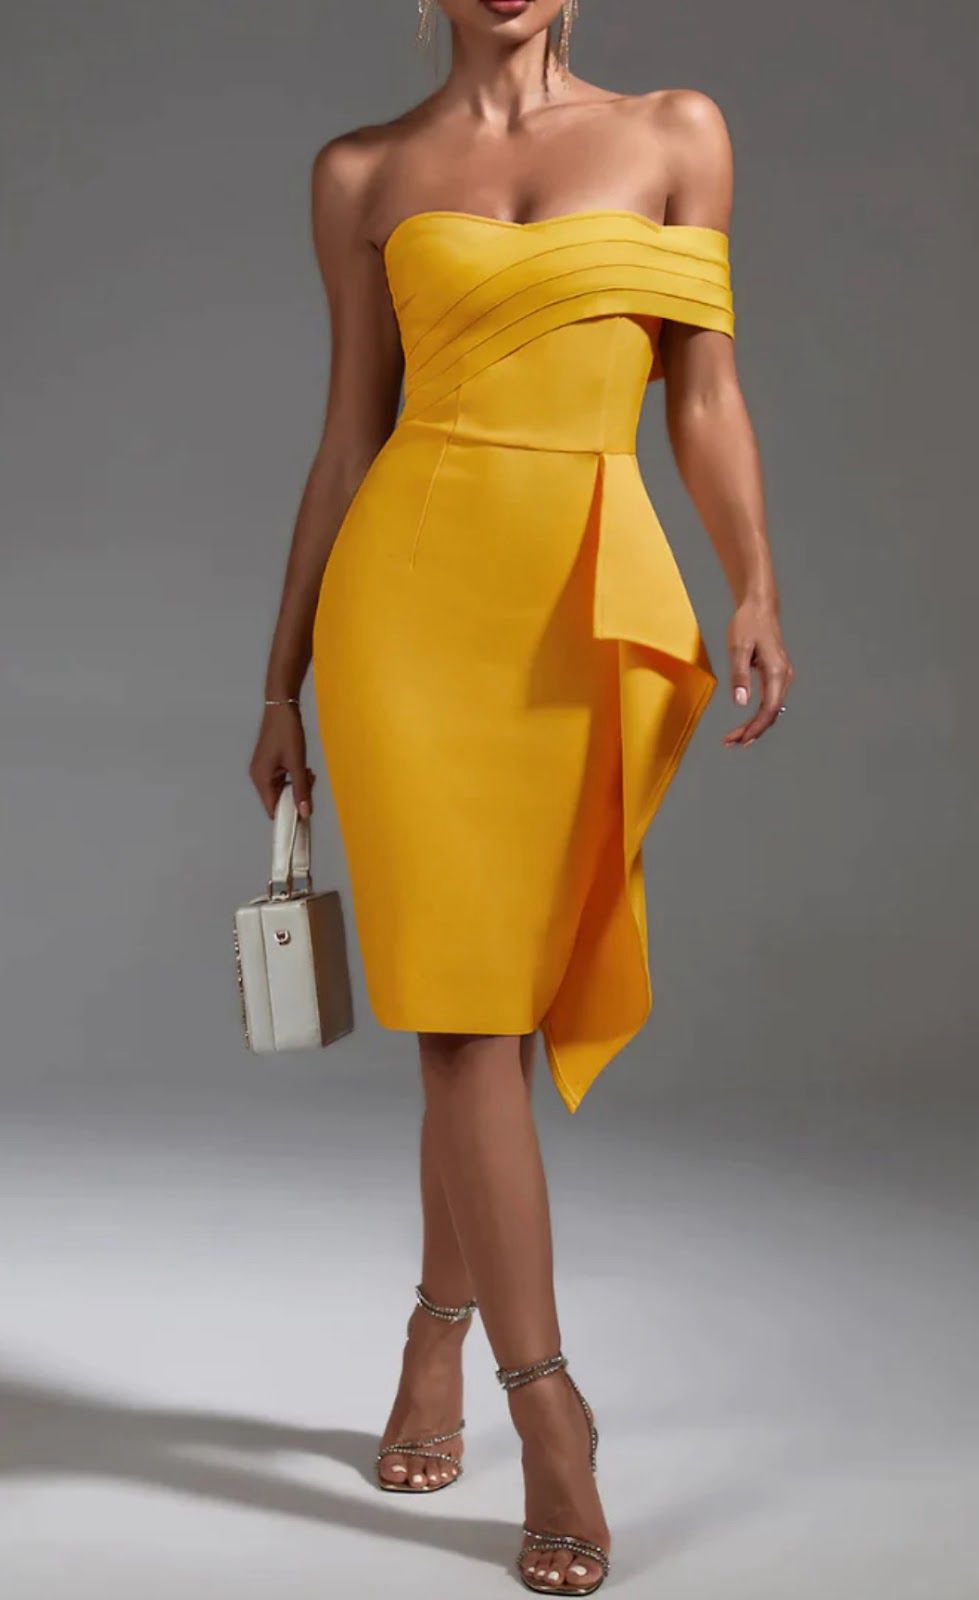 NEXT DAY DELIVERY MELODIA Off Shoulder Ruffled Midi Bandage Dress